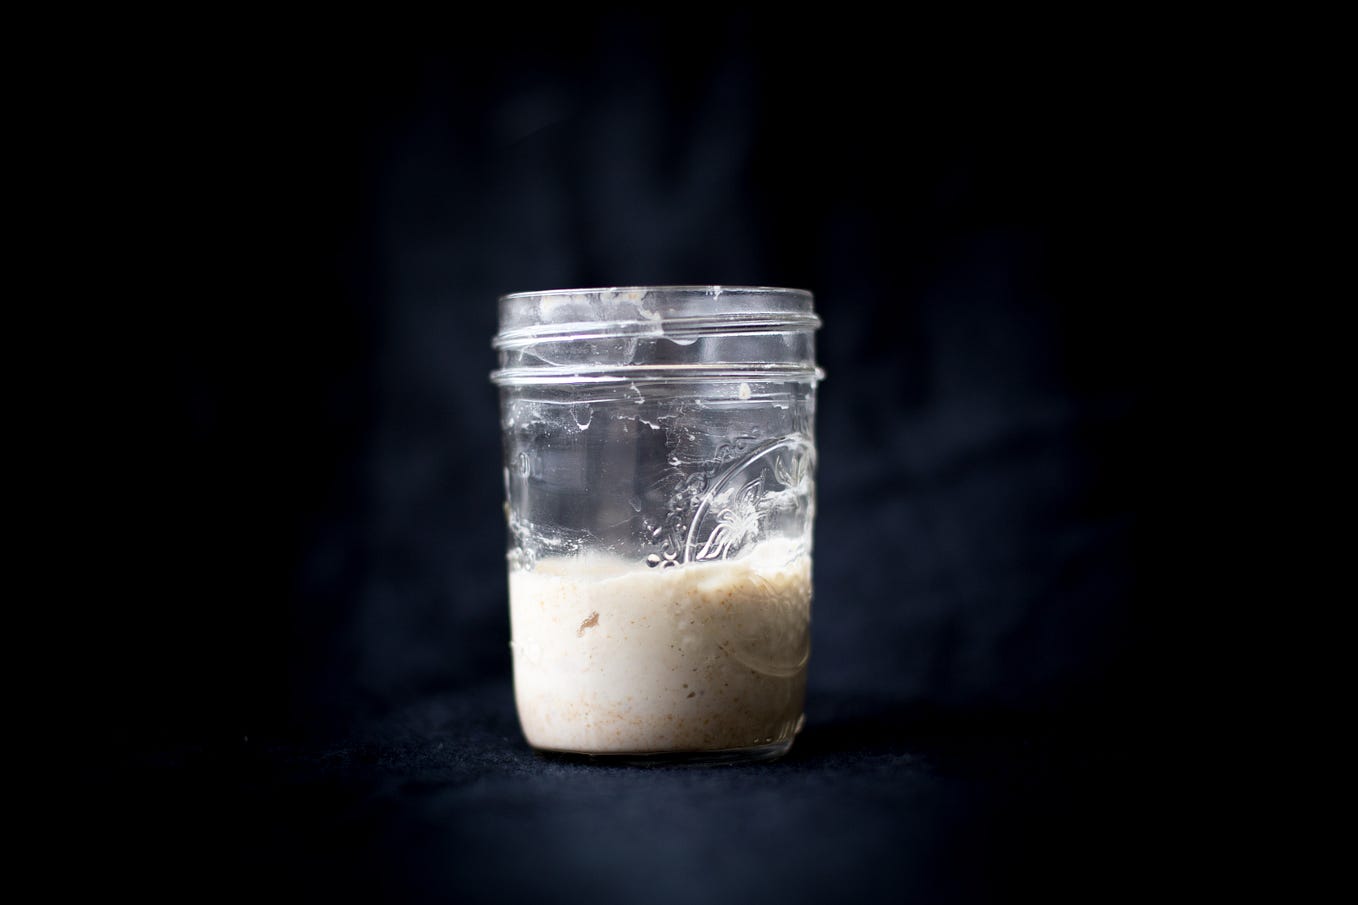 Sourdough starter from the Rob Dunn Lab at North Carolina State University